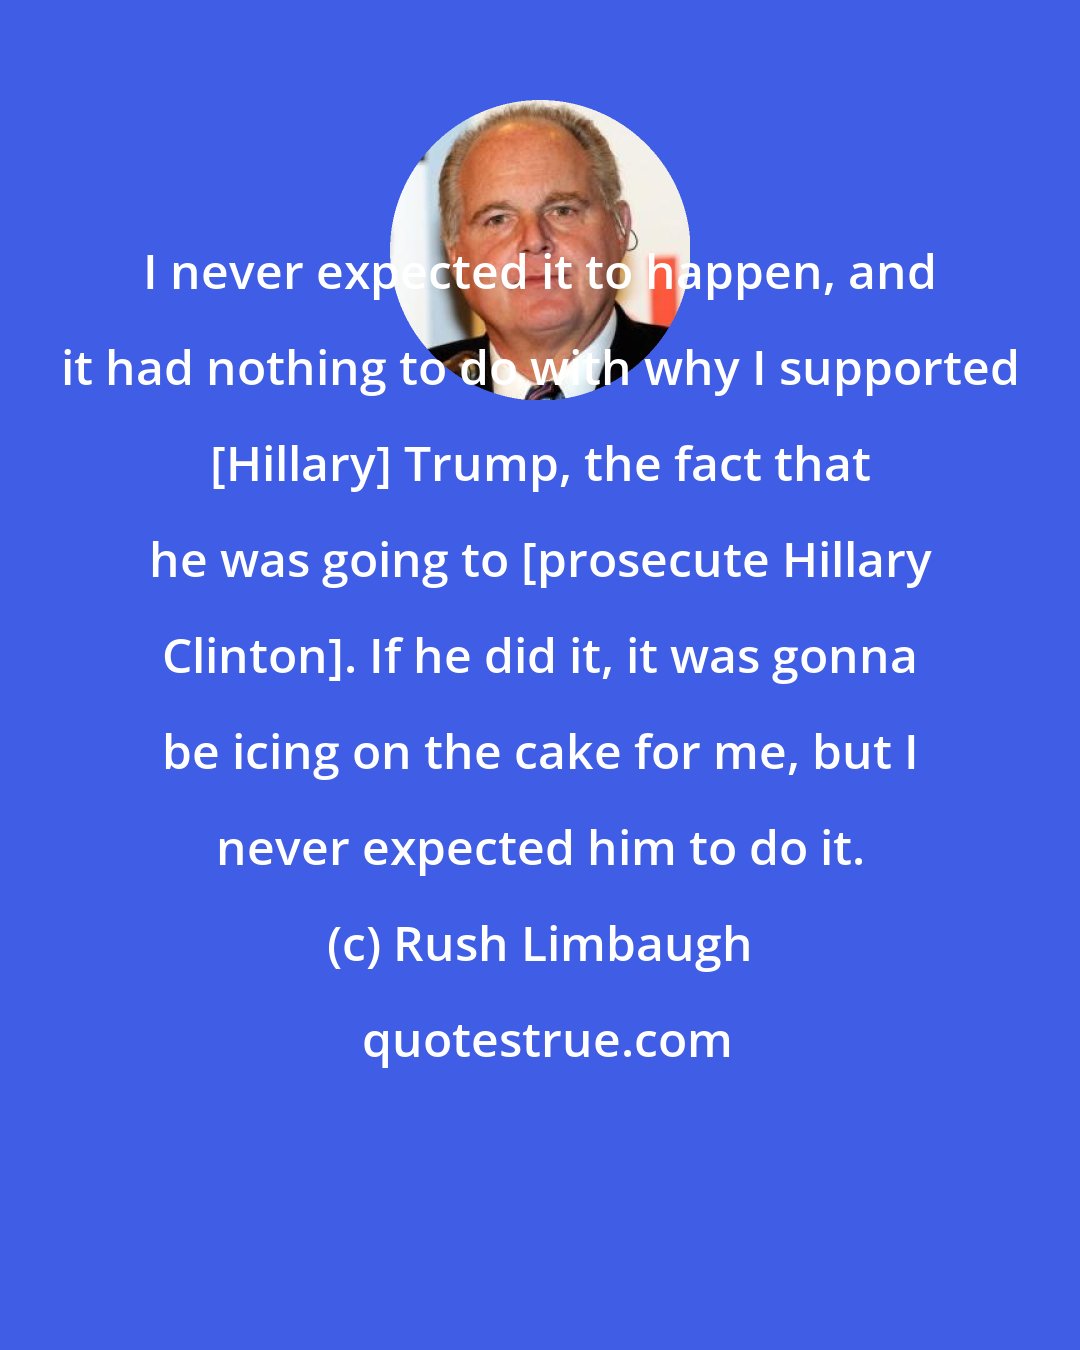 Rush Limbaugh: I never expected it to happen, and it had nothing to do with why I supported [Hillary] Trump, the fact that he was going to [prosecute Hillary Clinton]. If he did it, it was gonna be icing on the cake for me, but I never expected him to do it.